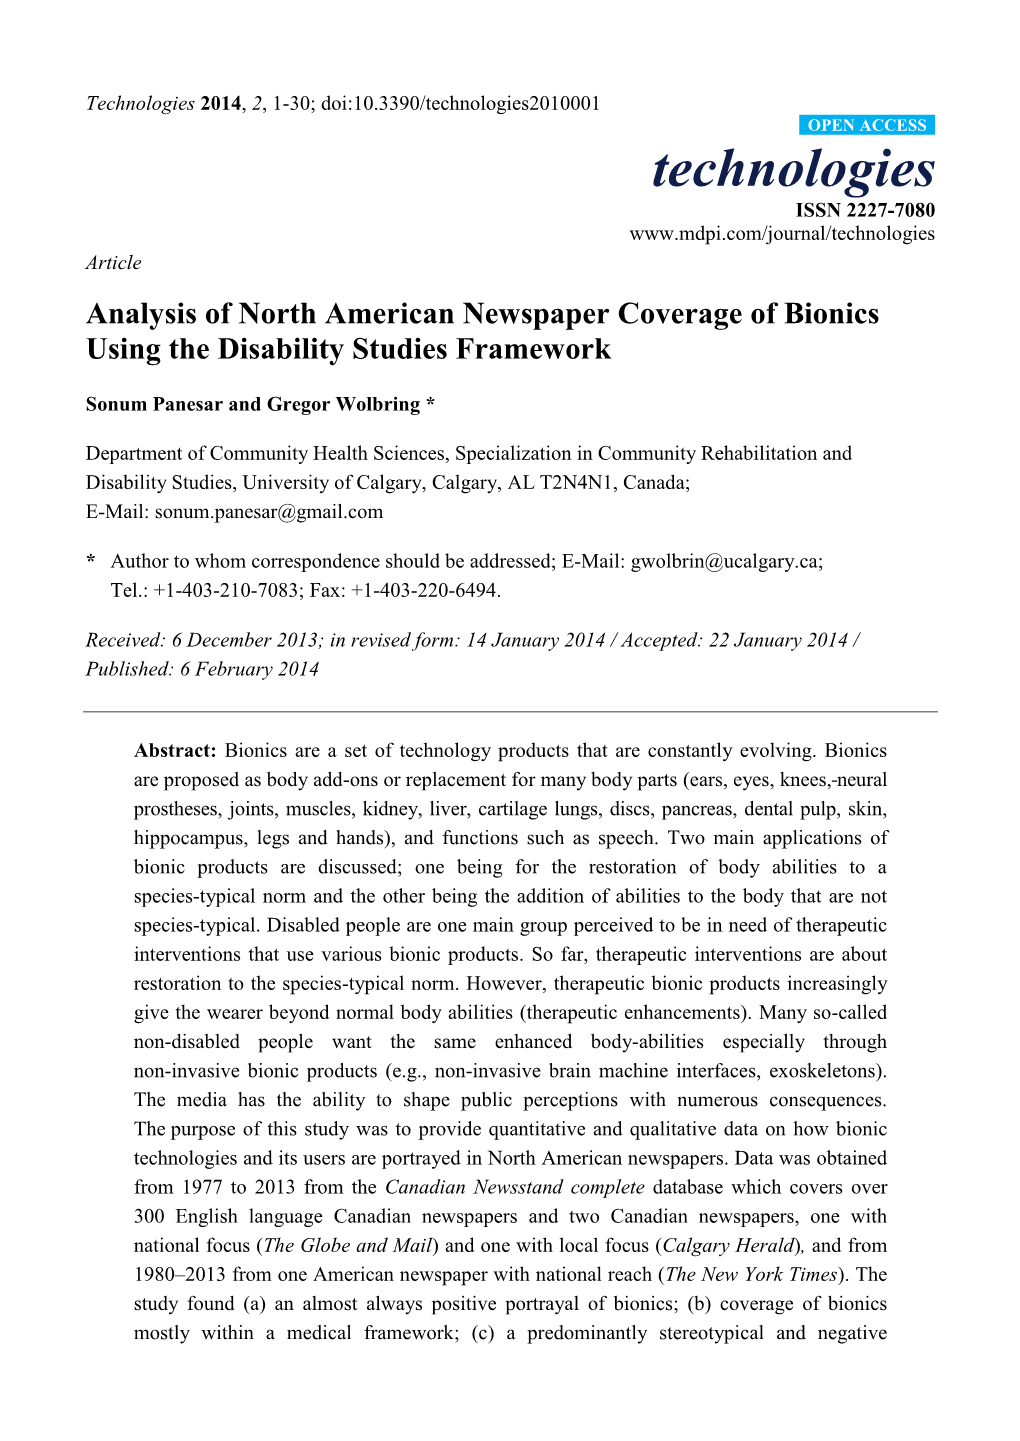 Analysis of North American Newspaper Coverage of Bionics Using the Disability Studies Framework